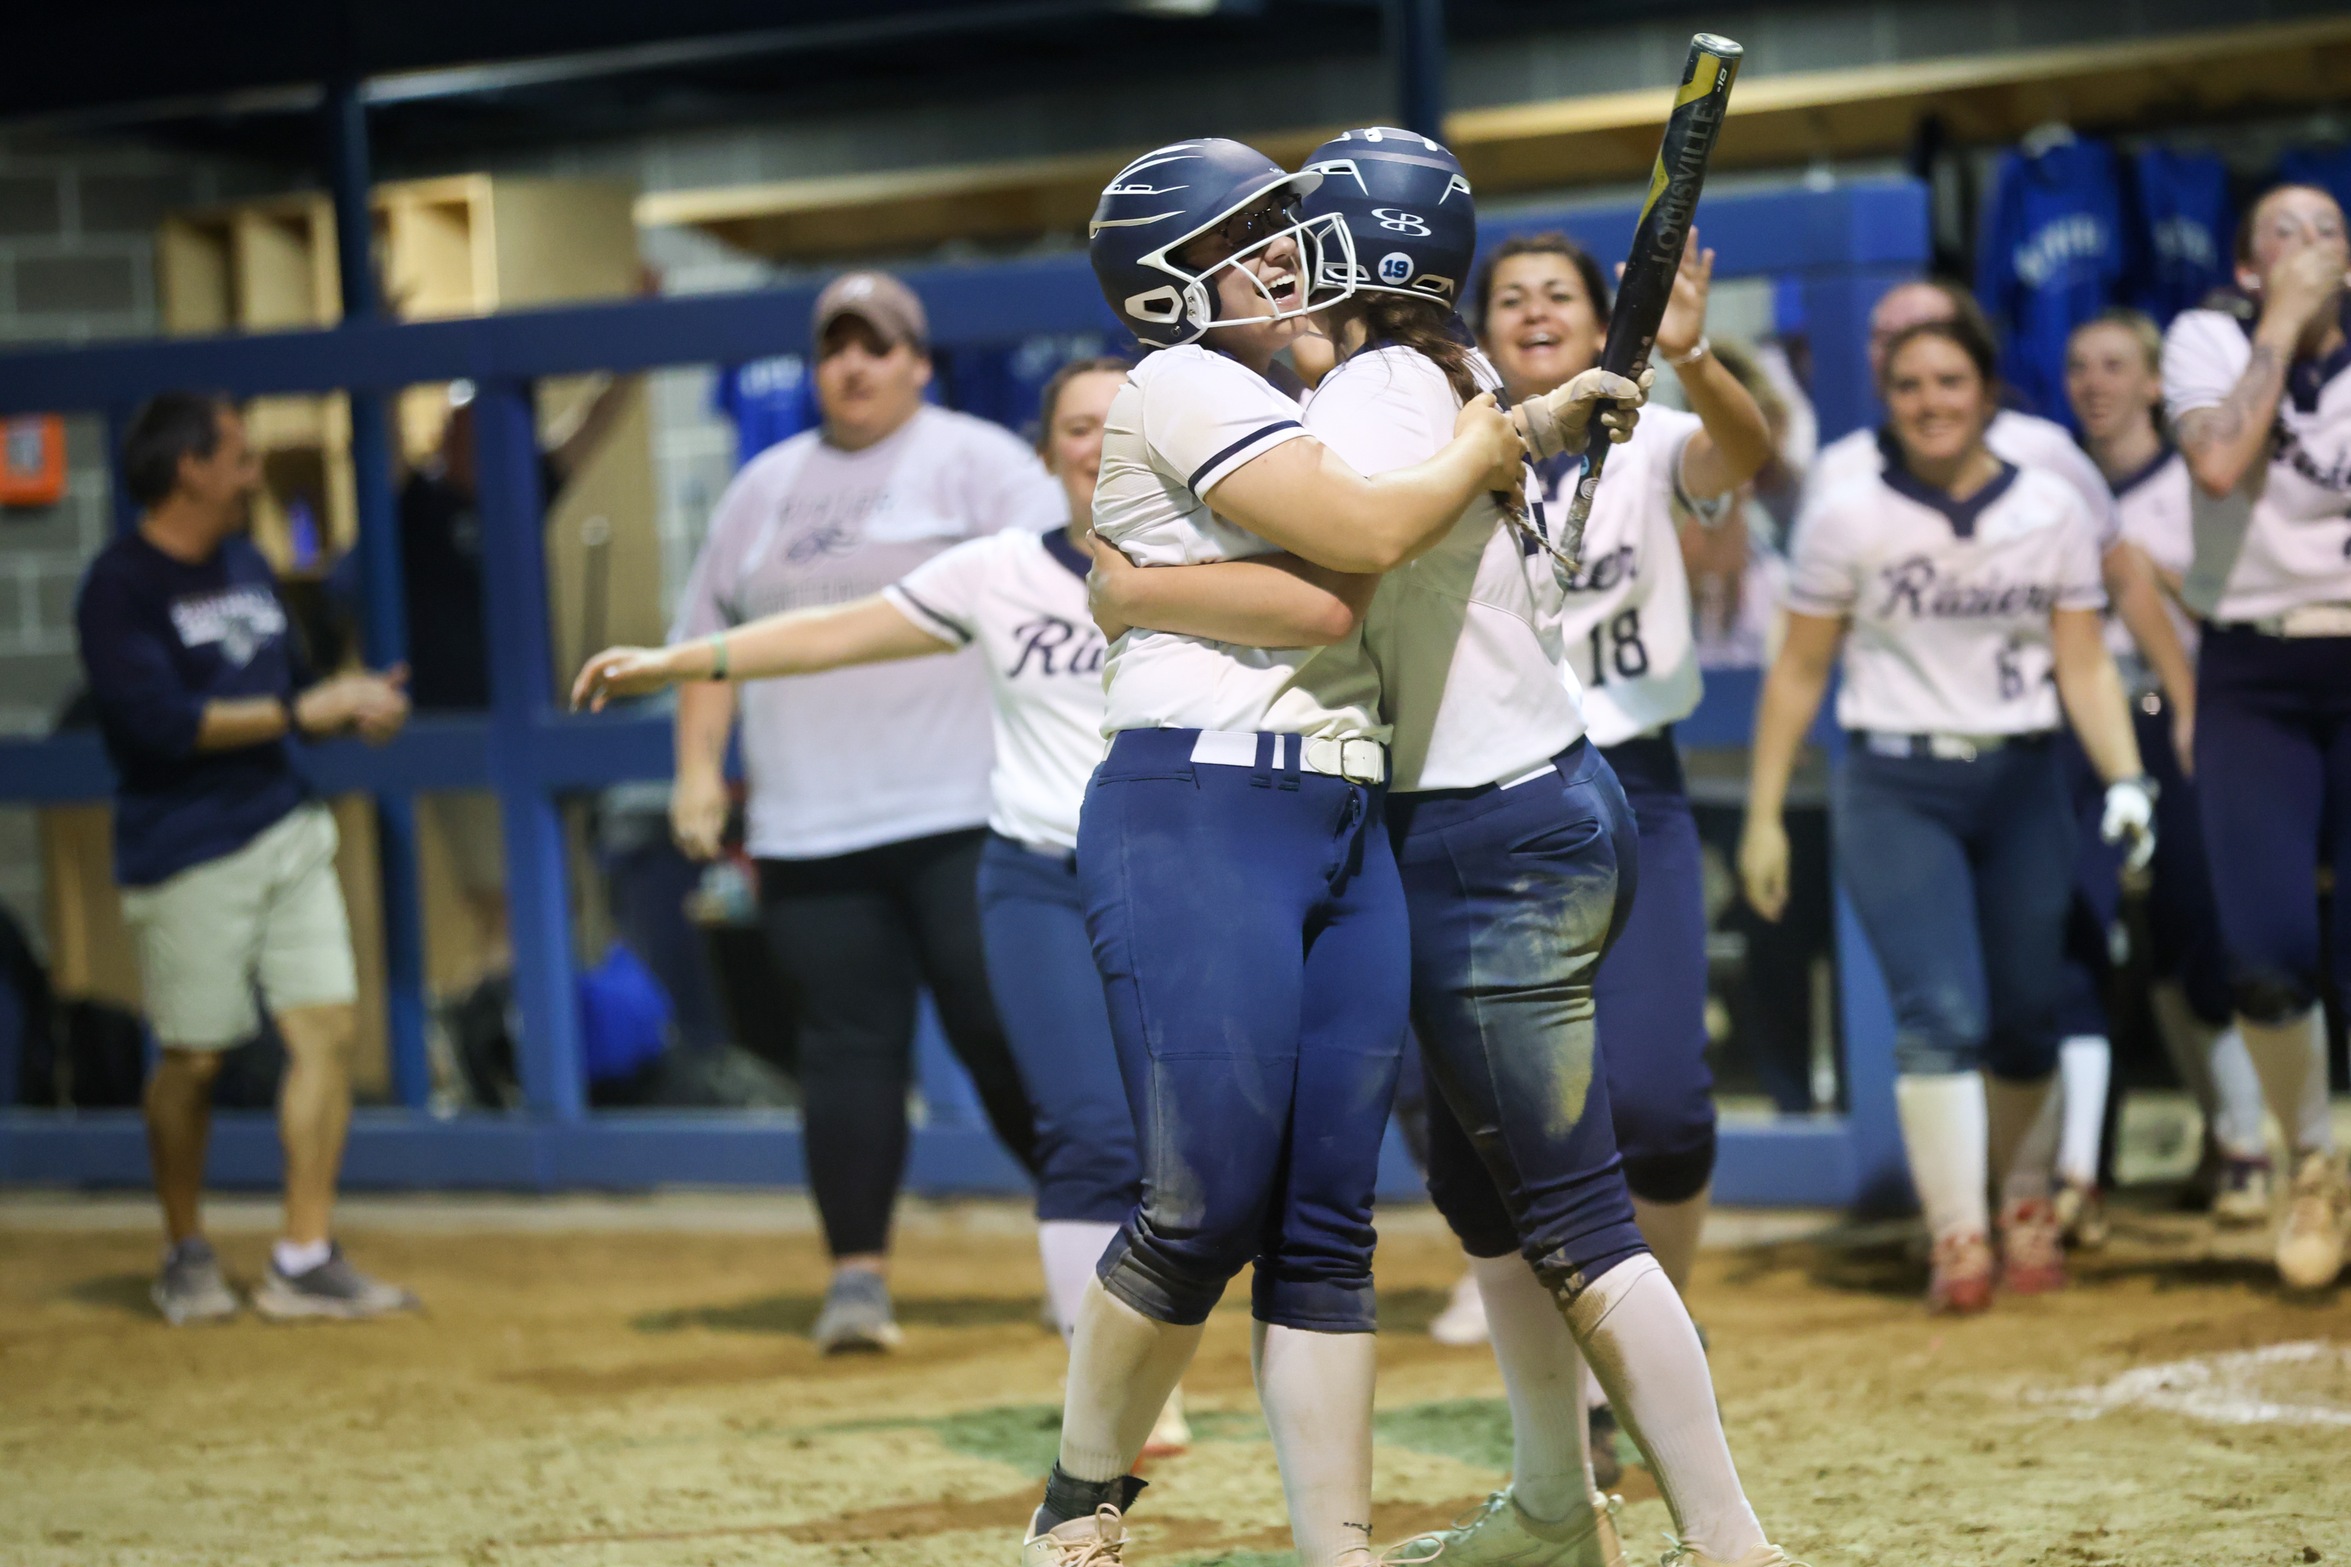 Softball Clinches Two Wins Over Pilgrims